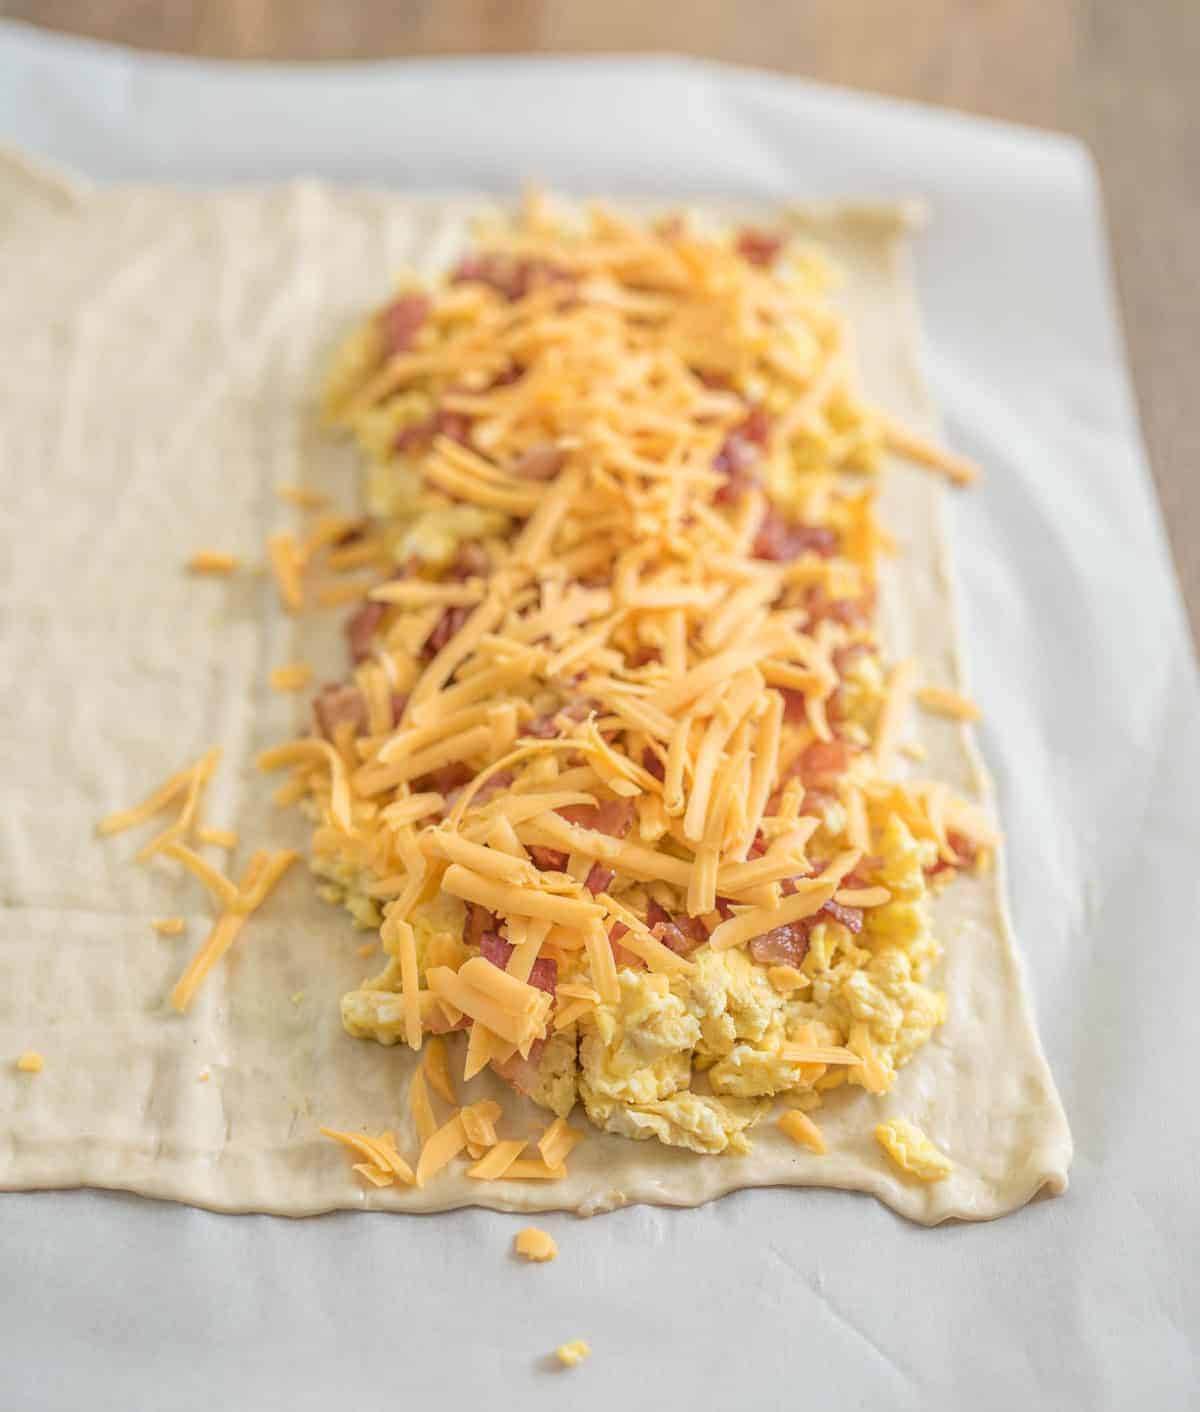 Quick and easy breakfast pizza sticks made with pizza dough, eggs, bacon, and cheese, all baked into easy to eat pizza sticks. 